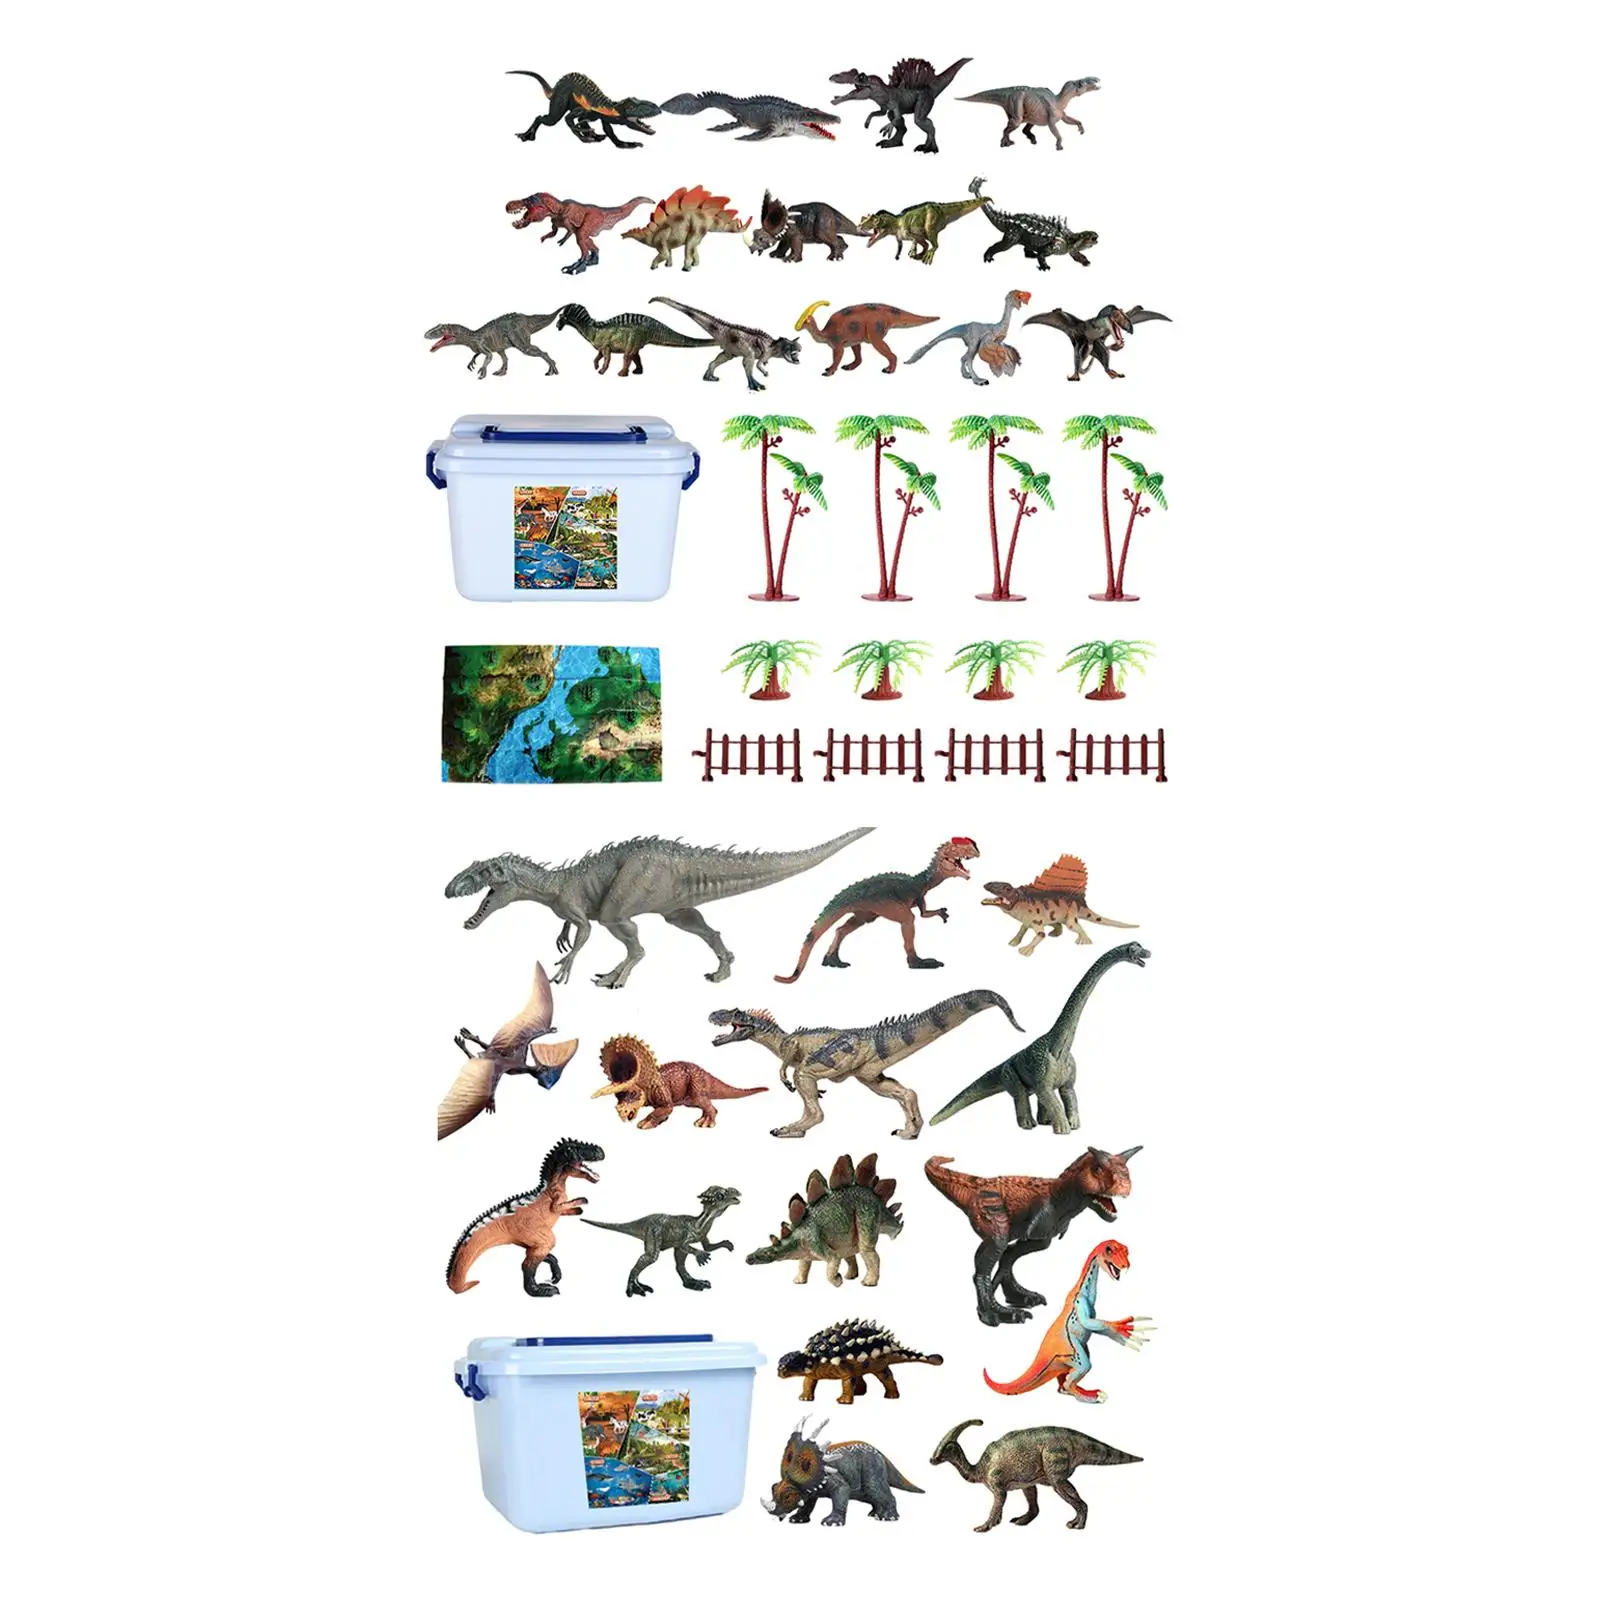 15 Pieces Dinosaur Toys Decoration for Birthday Party Favors Cake Topper